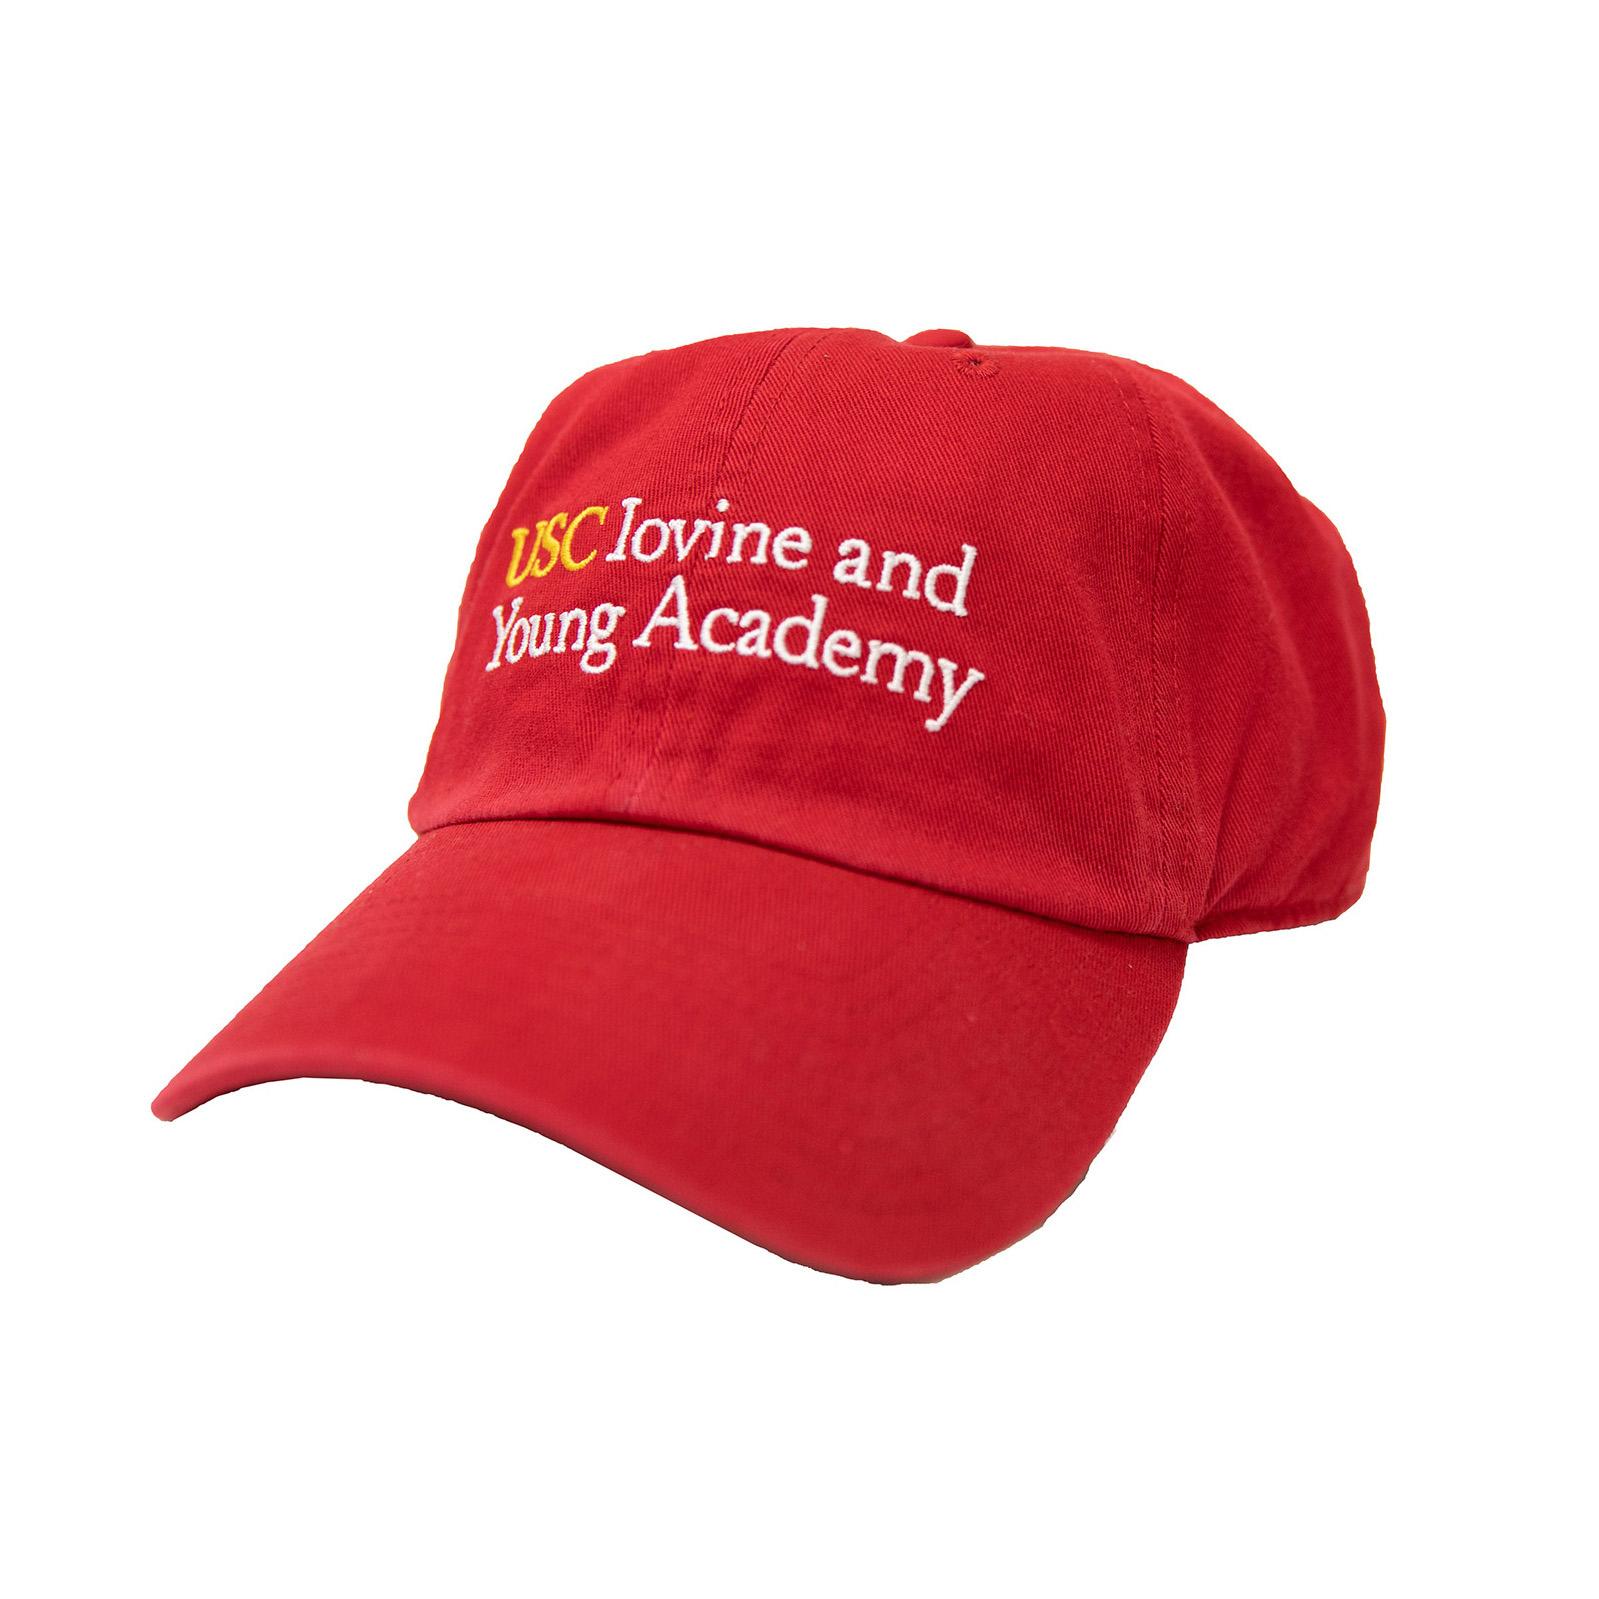 USC School of Iovine and Young Academy Cap Cardinal Fits All image01